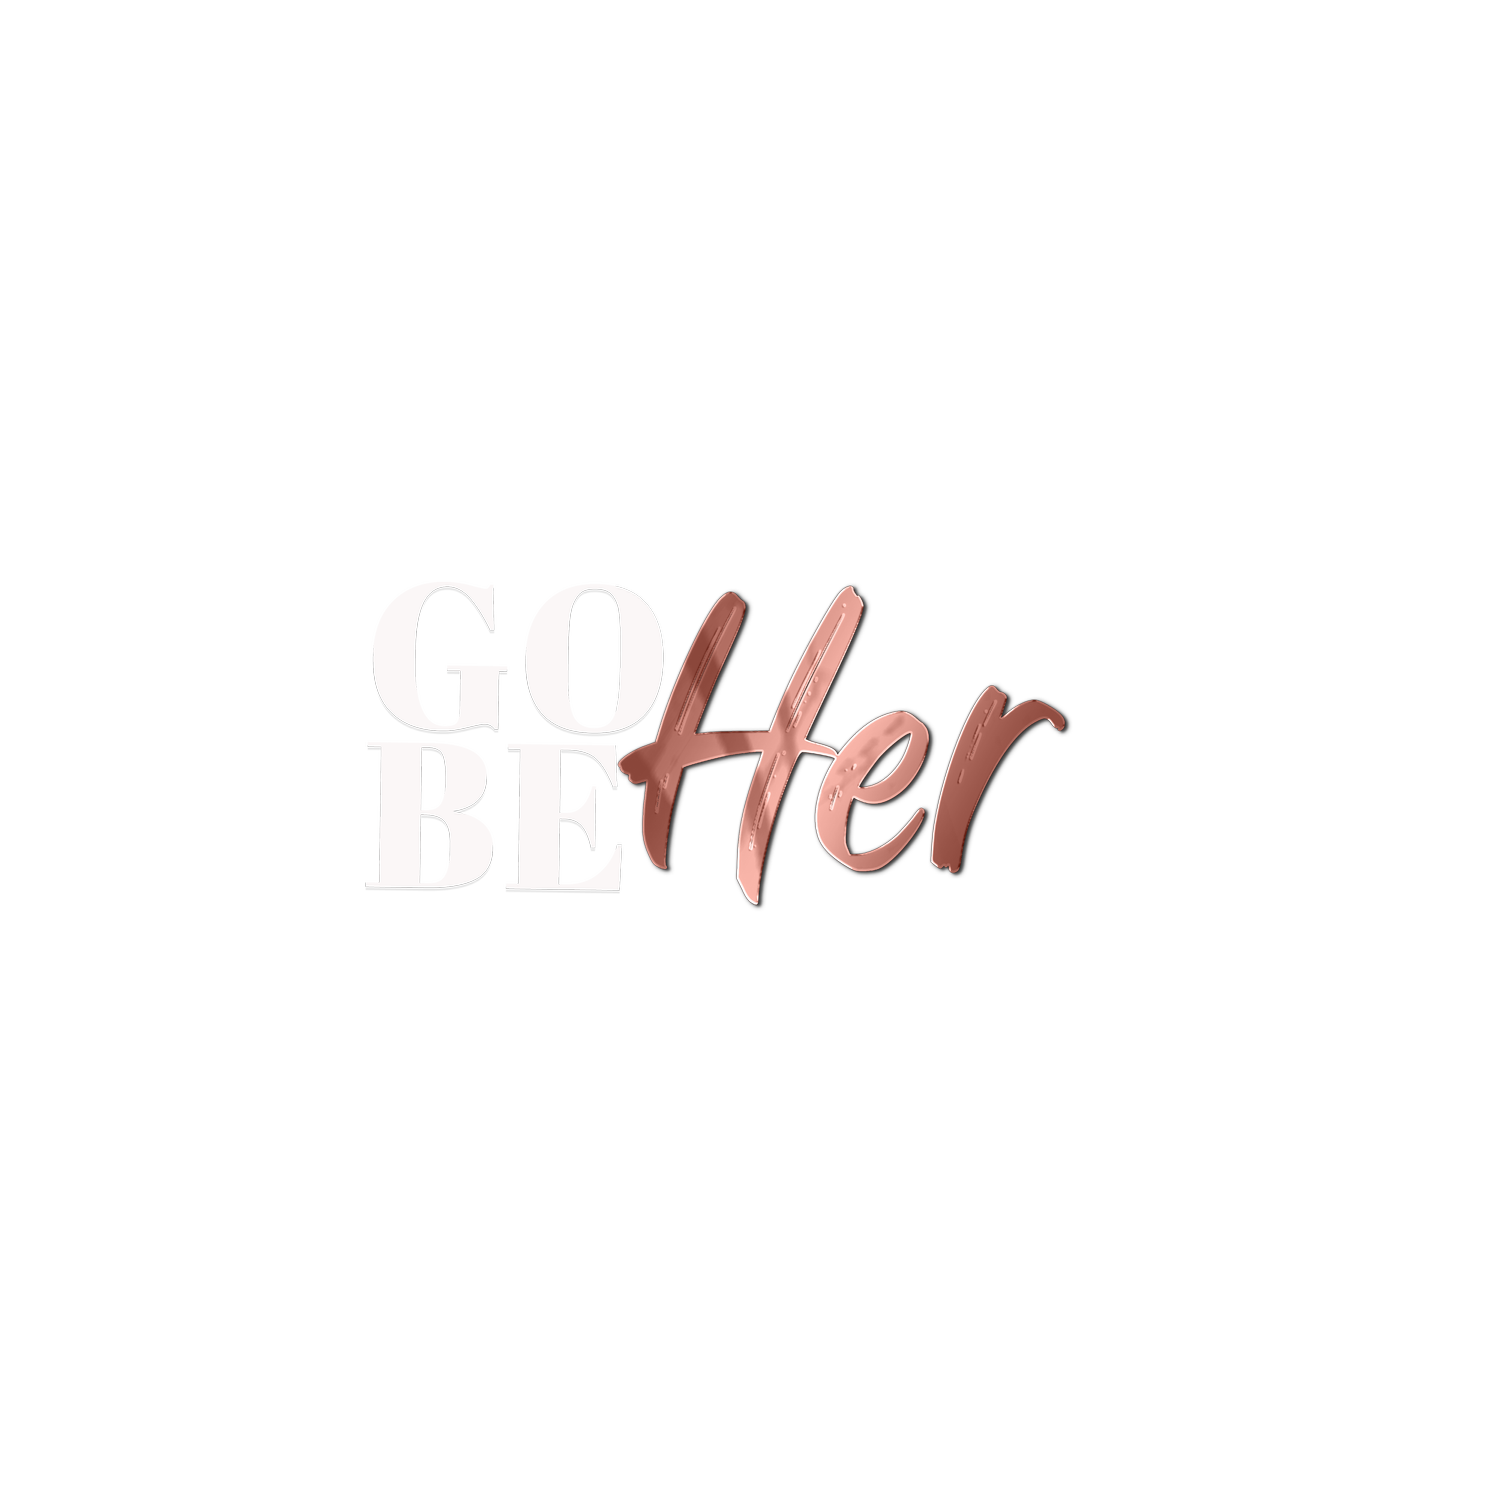 Go Be Her